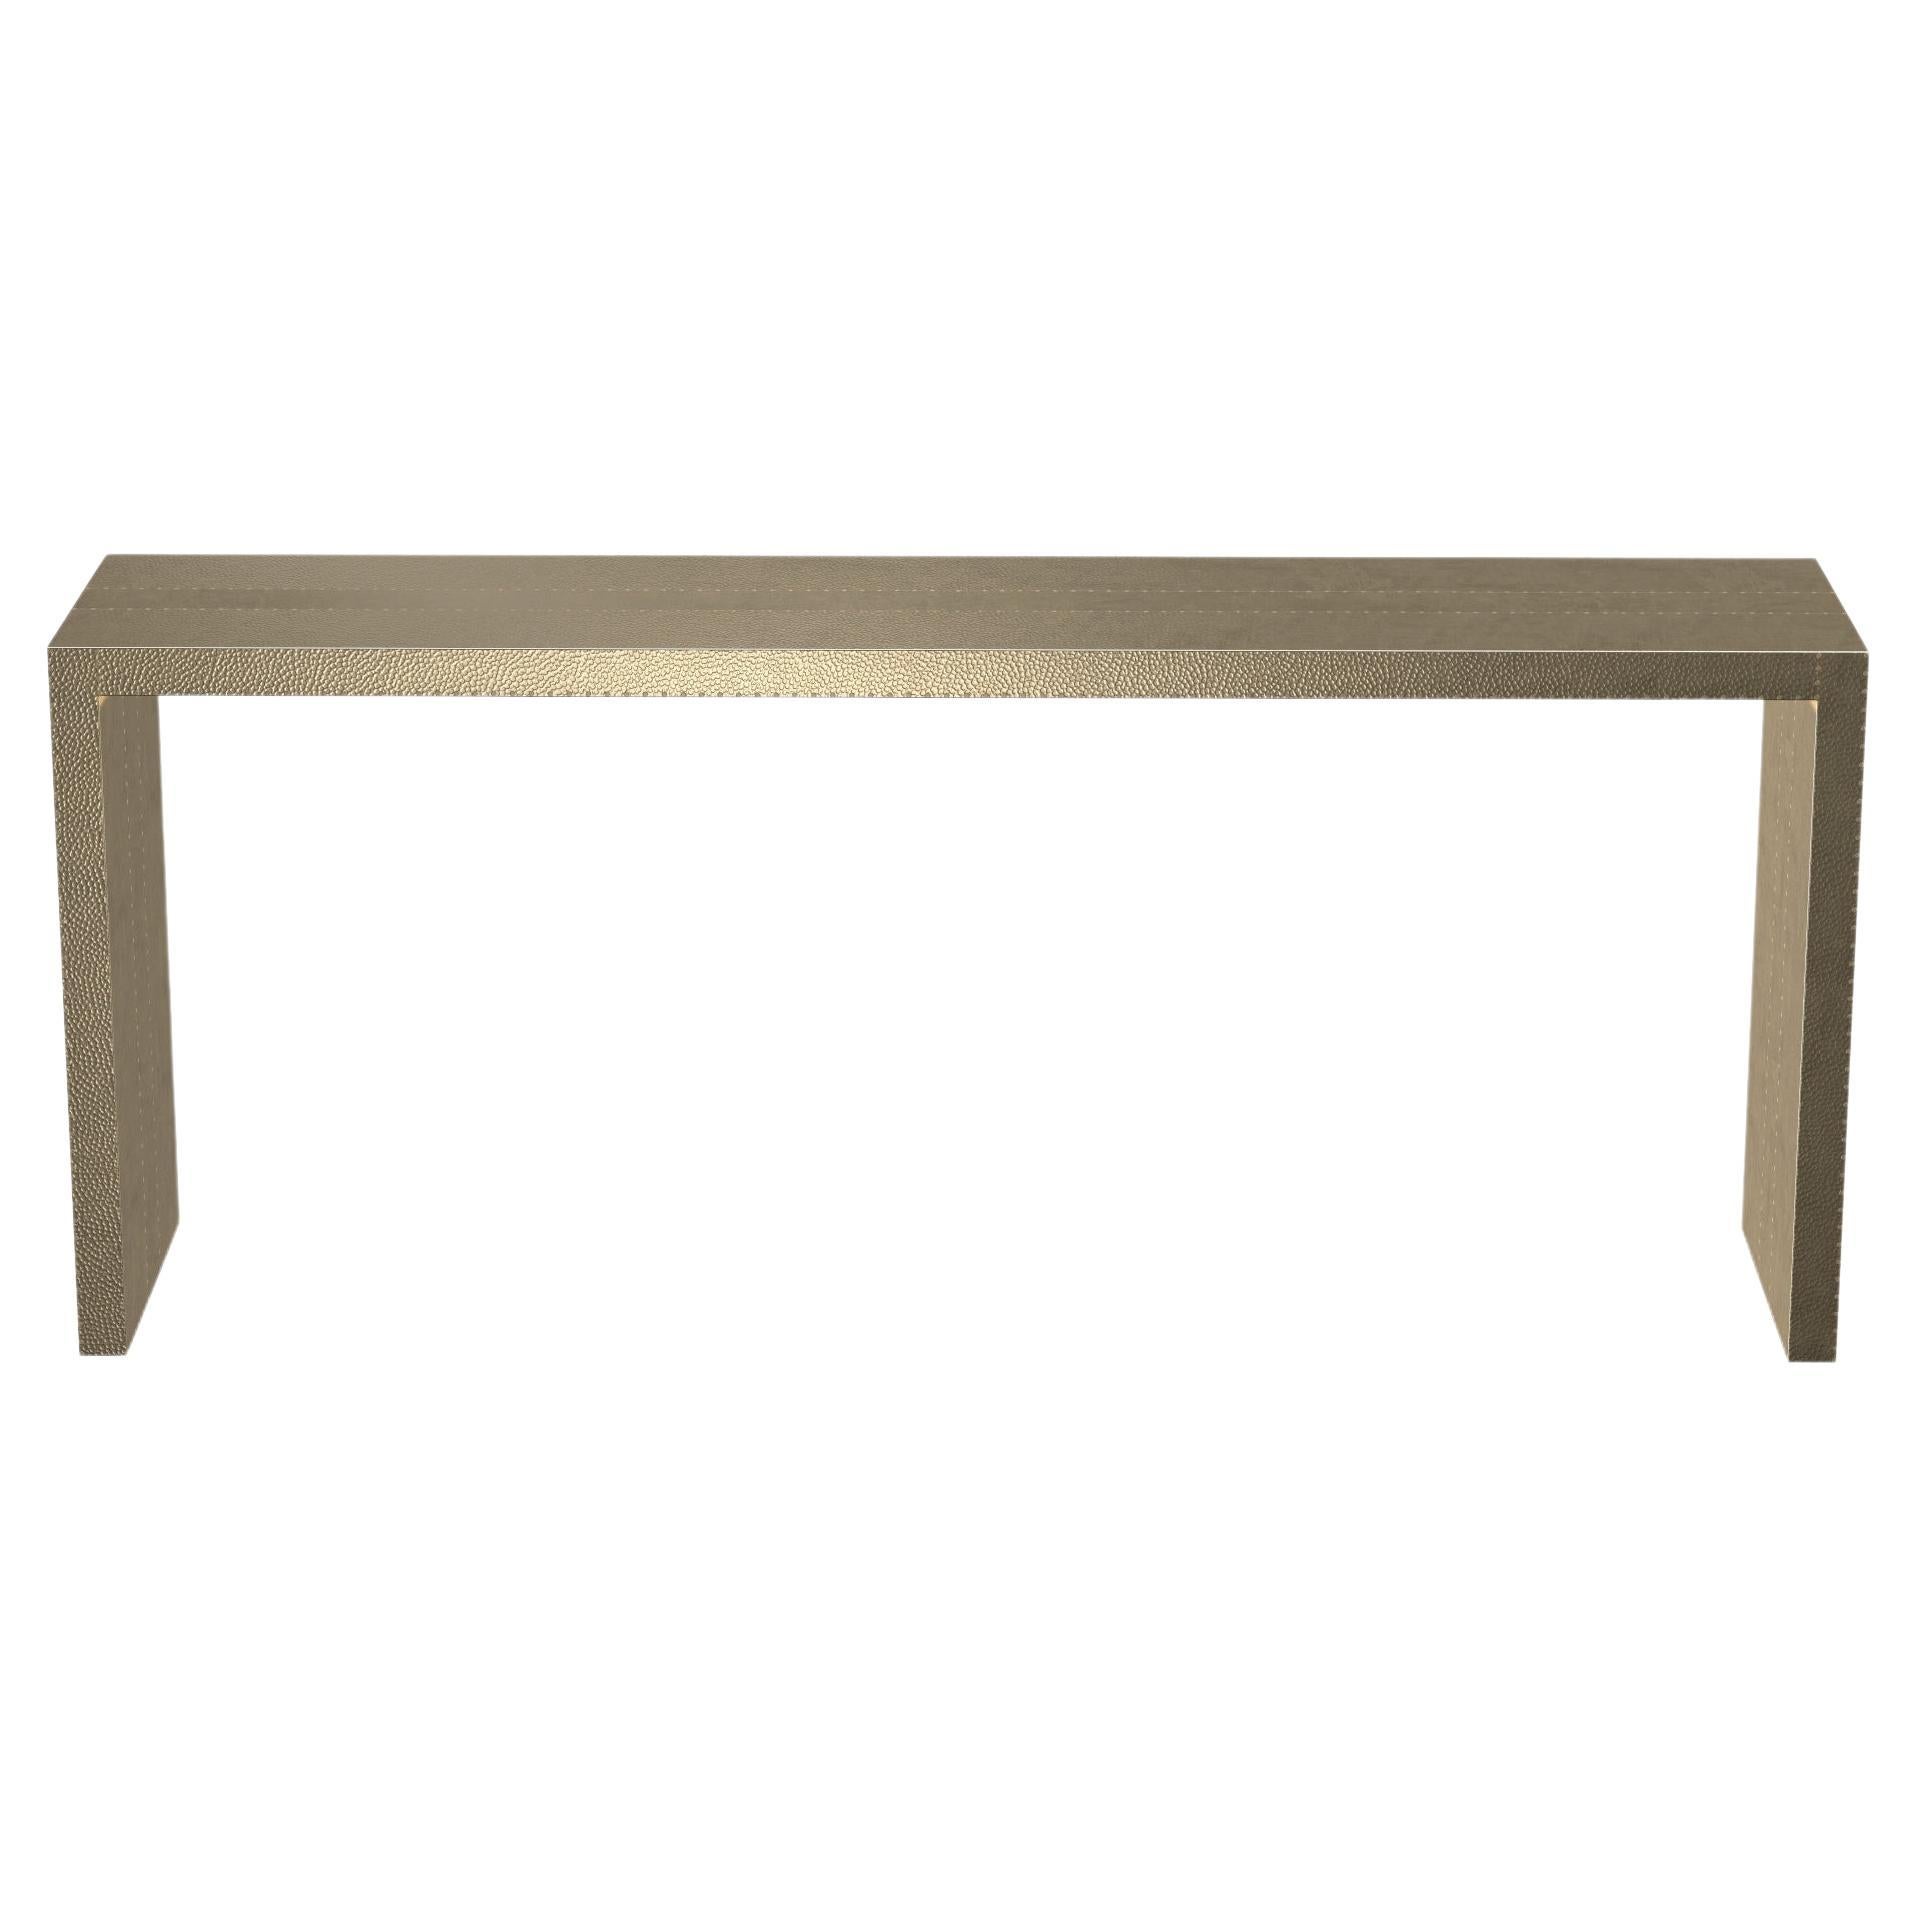 Art Nouveau Tray Console Tables Mid. Hammered in Brass by Alison Spear